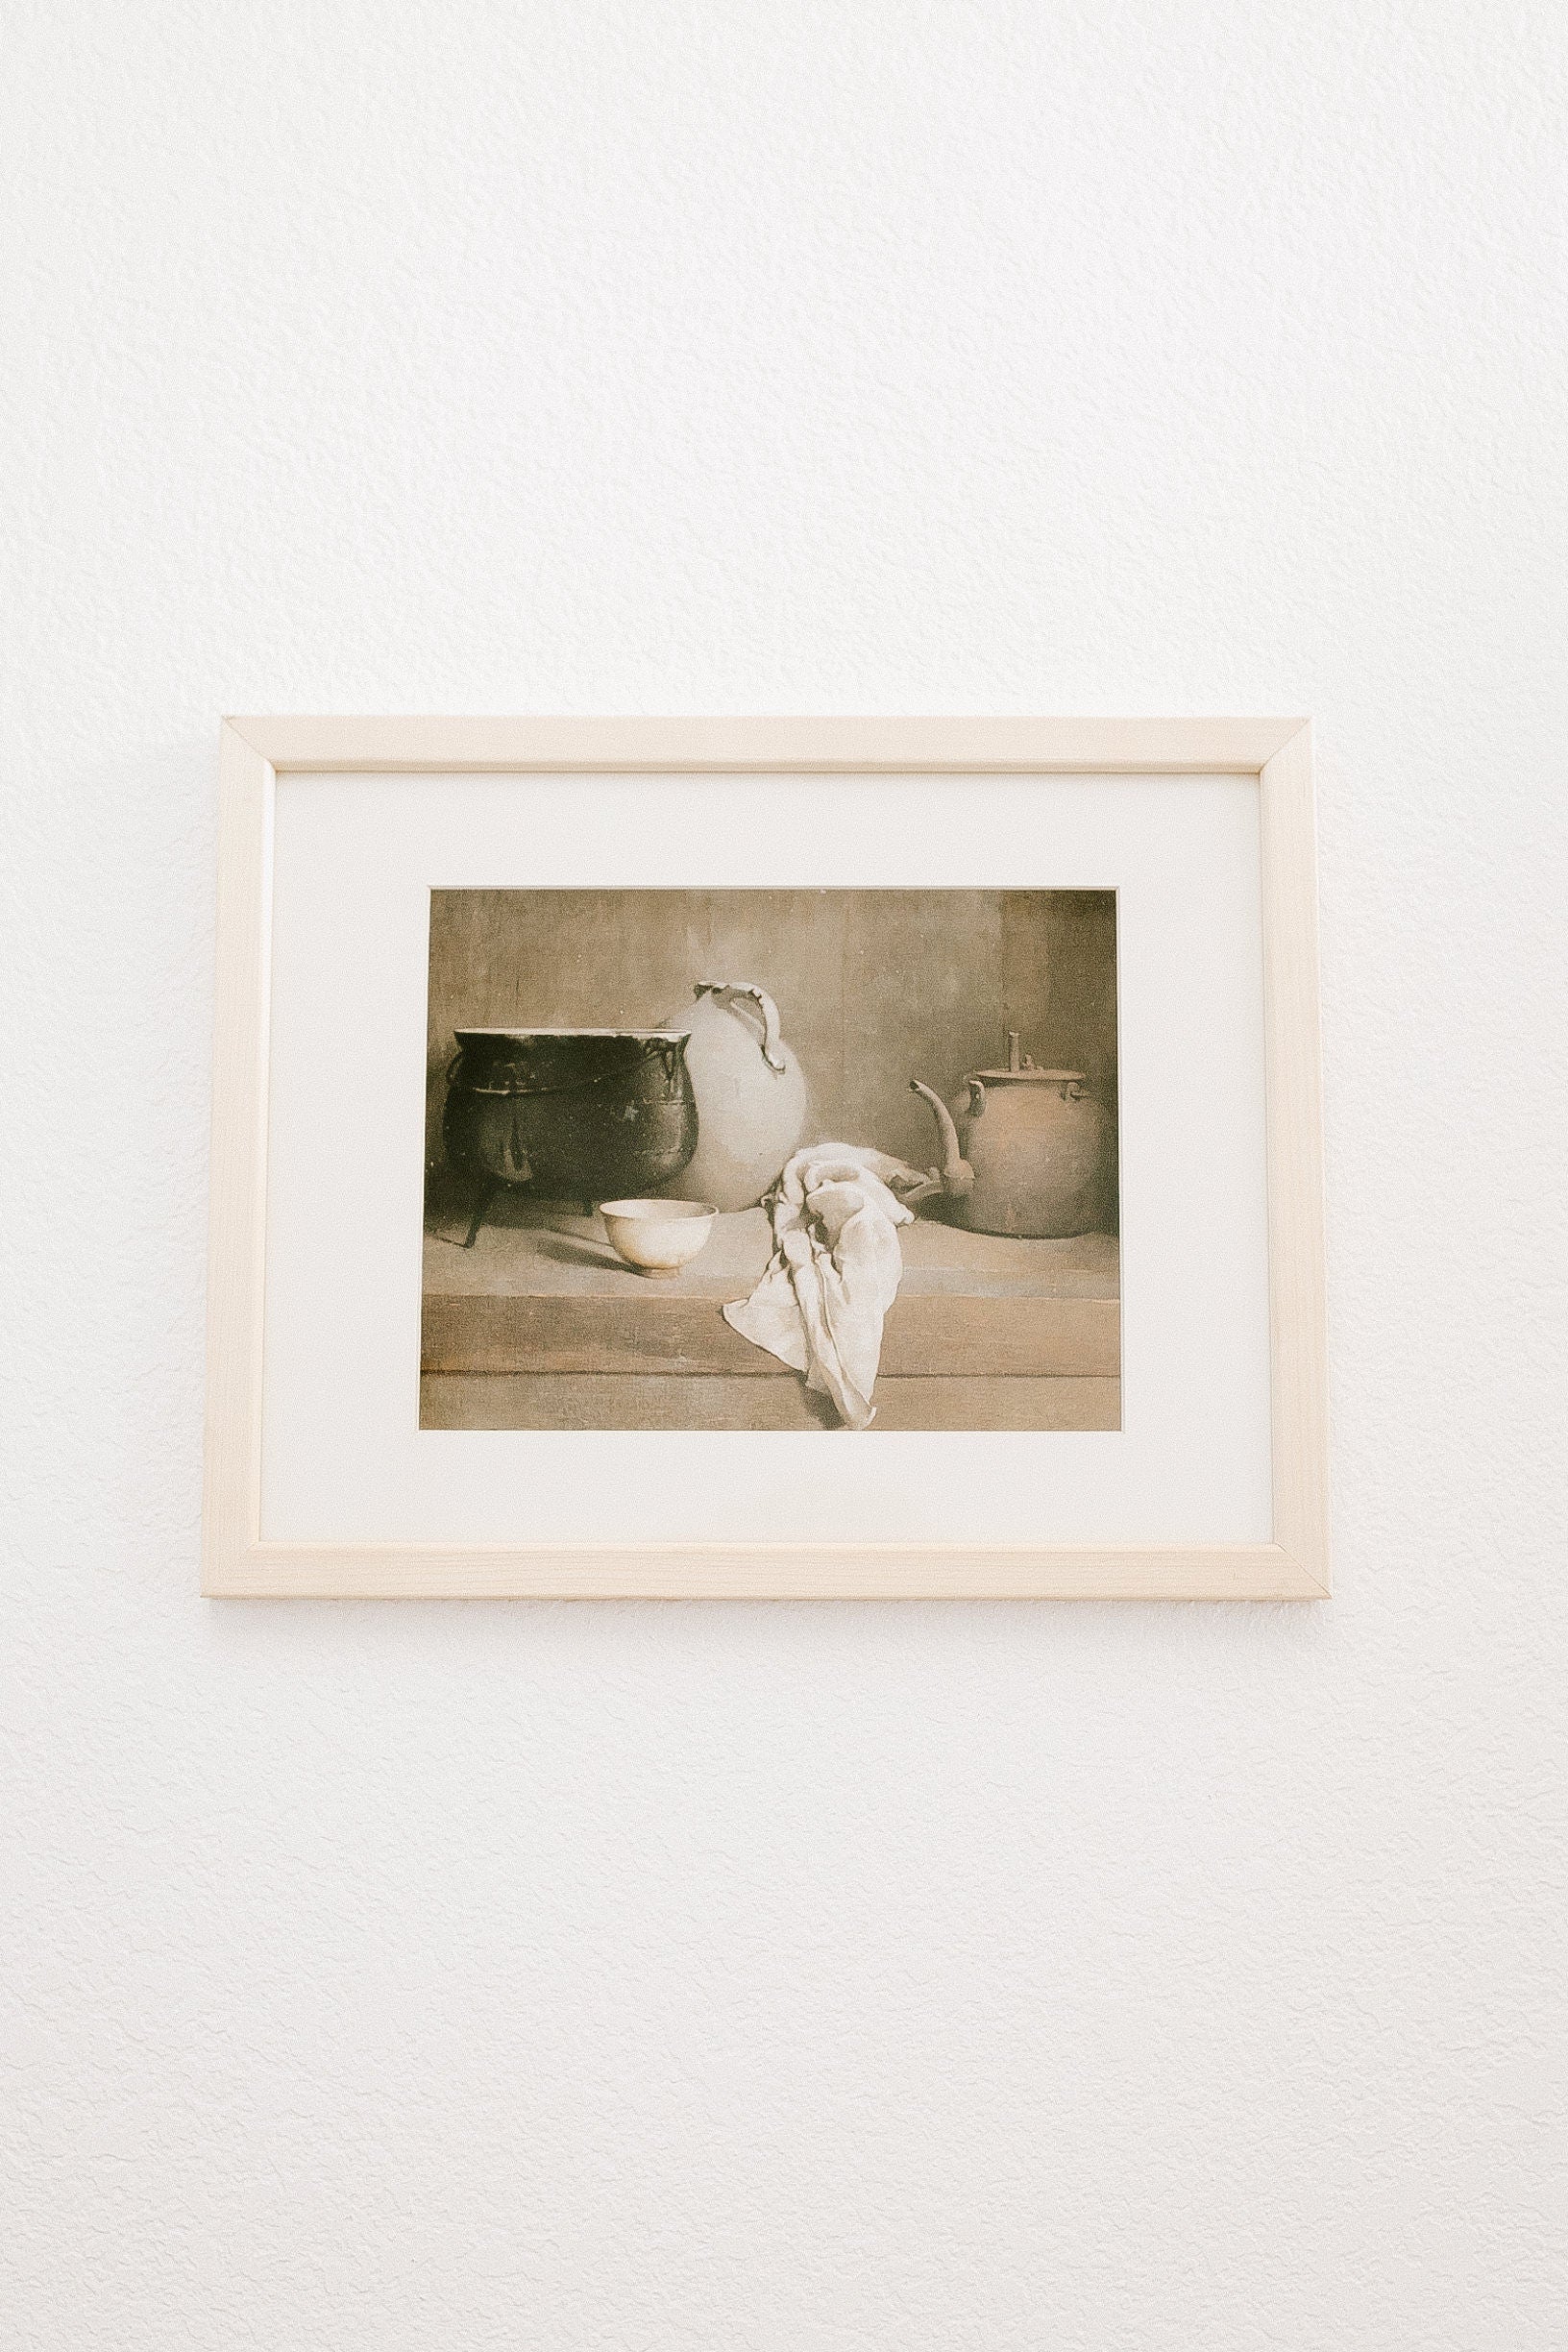 Vernon Wall Art at THELIFESTYLEDCO™ Small scale, big impact - Our Micro Art Collection is a hand curated selection of vintage inspired + modern prints intended to fill all the cozy spaces in your home.